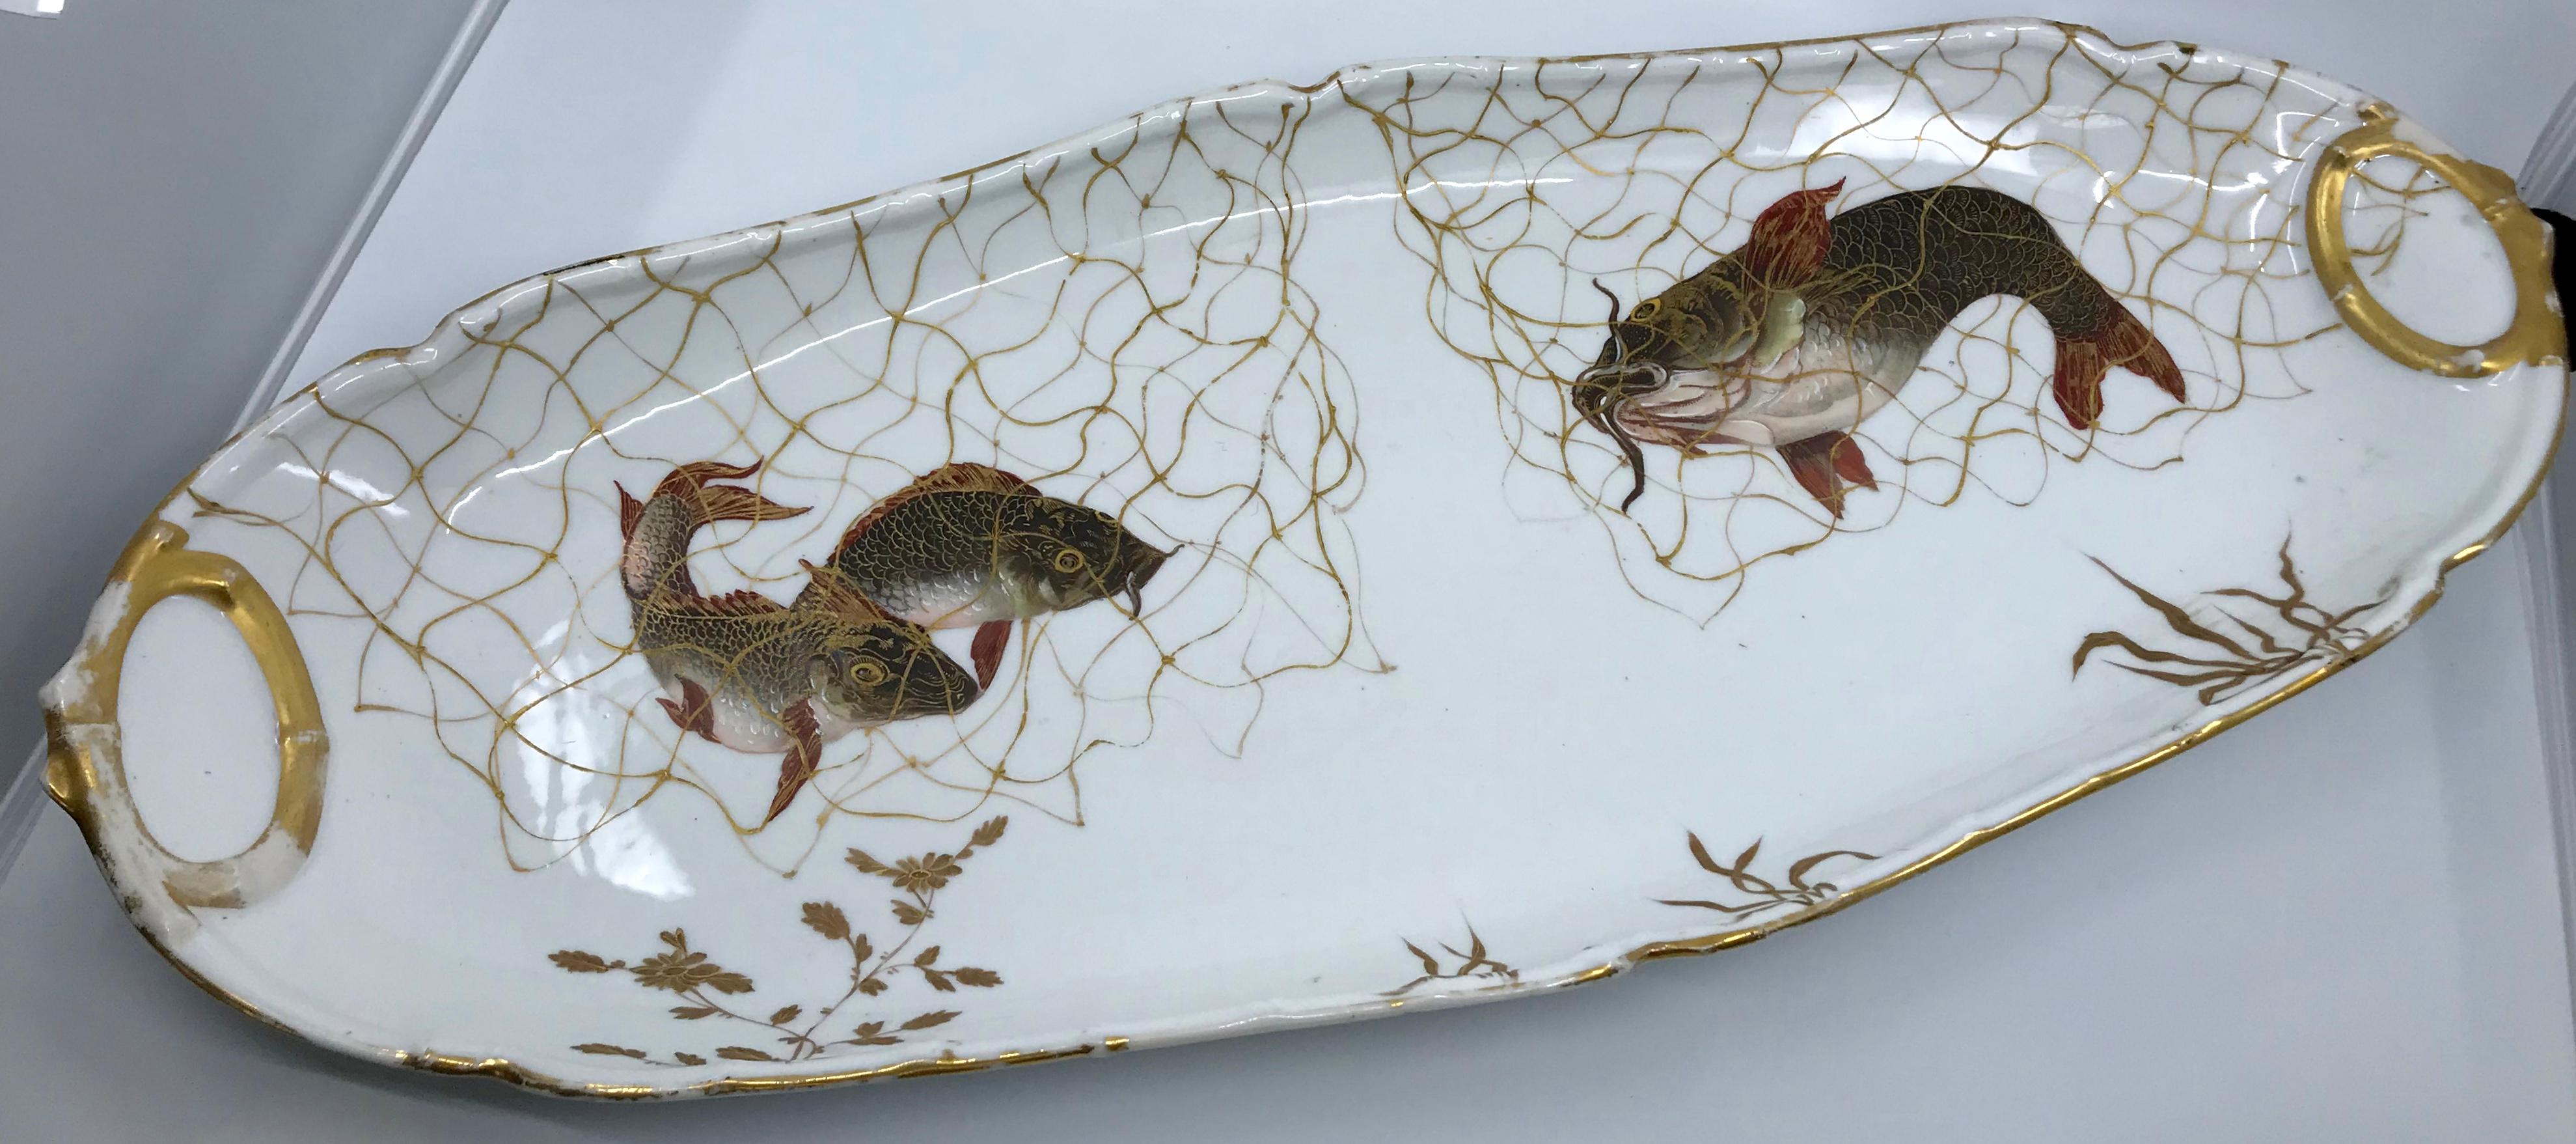 Set of ten Limoges French aesthetic movement fish plates and platter. Hand-painted and gilt Limoges porcelain fish service in a rare, modern Oriental-inspired design with five different pairs of fish in elegant fine gold nets and aquatic plants.